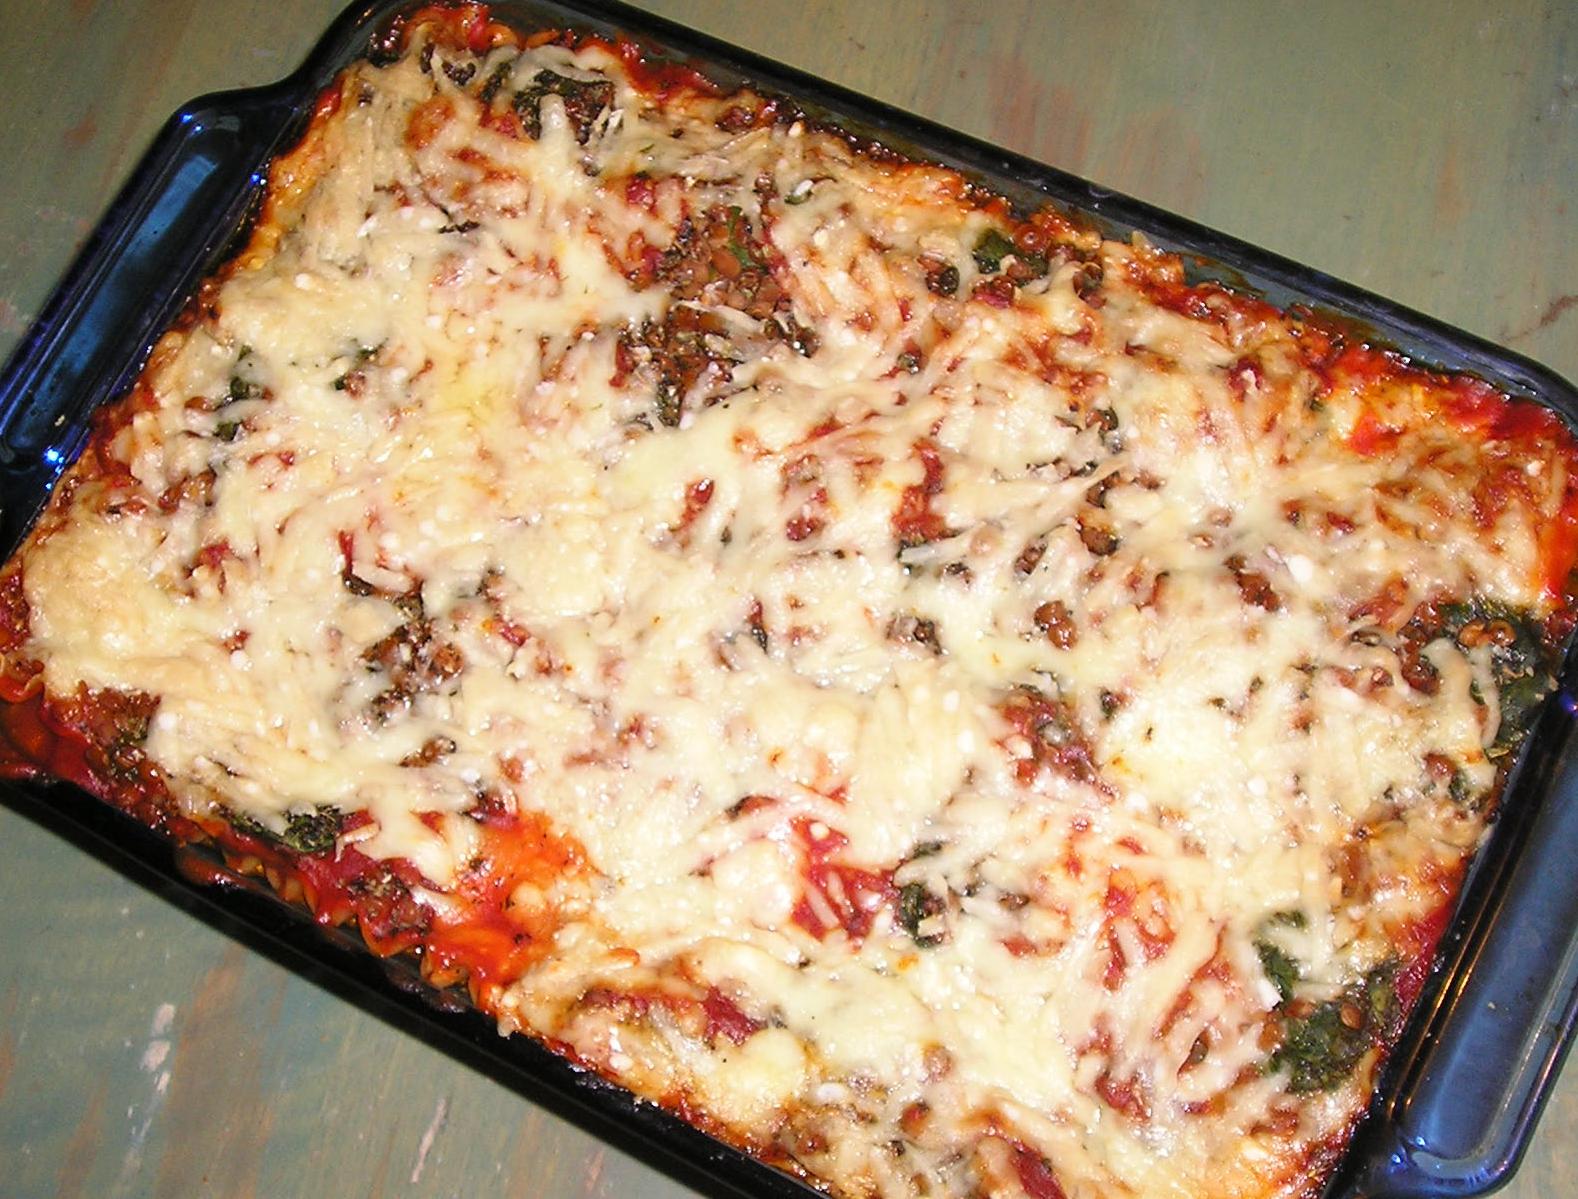  Layers of spinach and lentils create a mouthwatering visual feast in this lasagna dish.